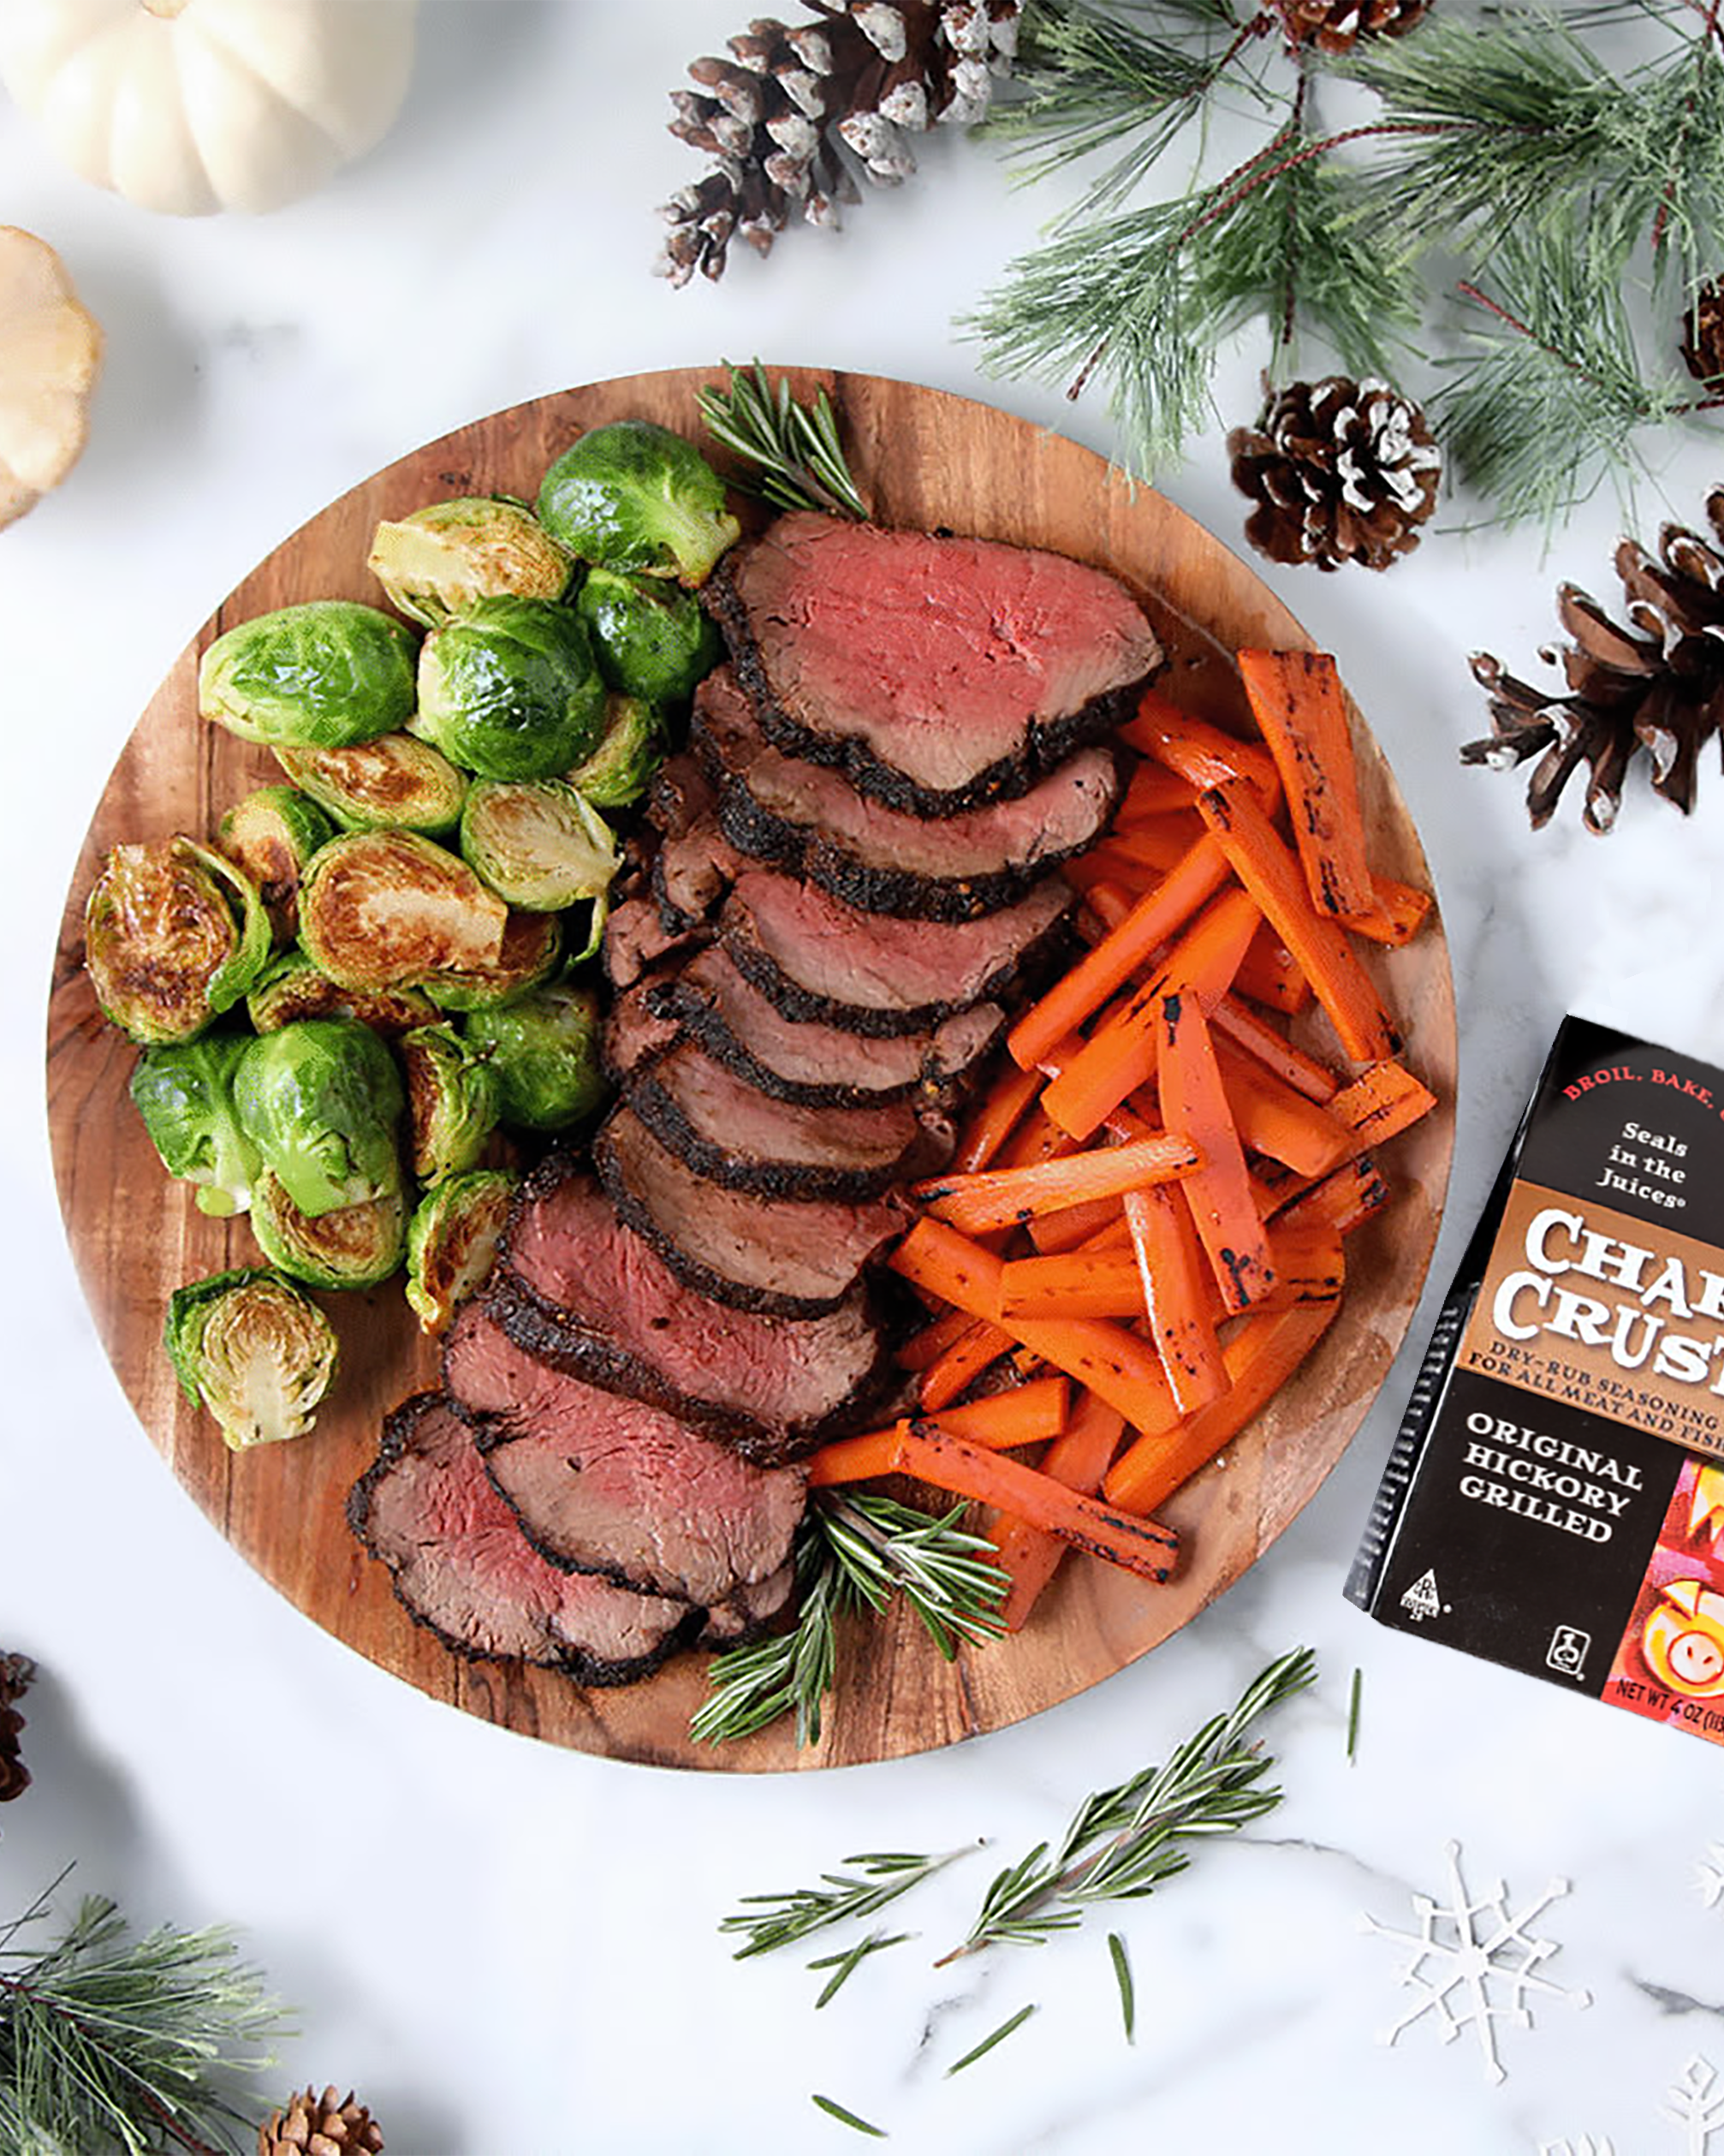 Char Crust Original Hickory Grilled Holiday Tenderloin. Perfectly crusted steak, with juicy, flavorful inside.